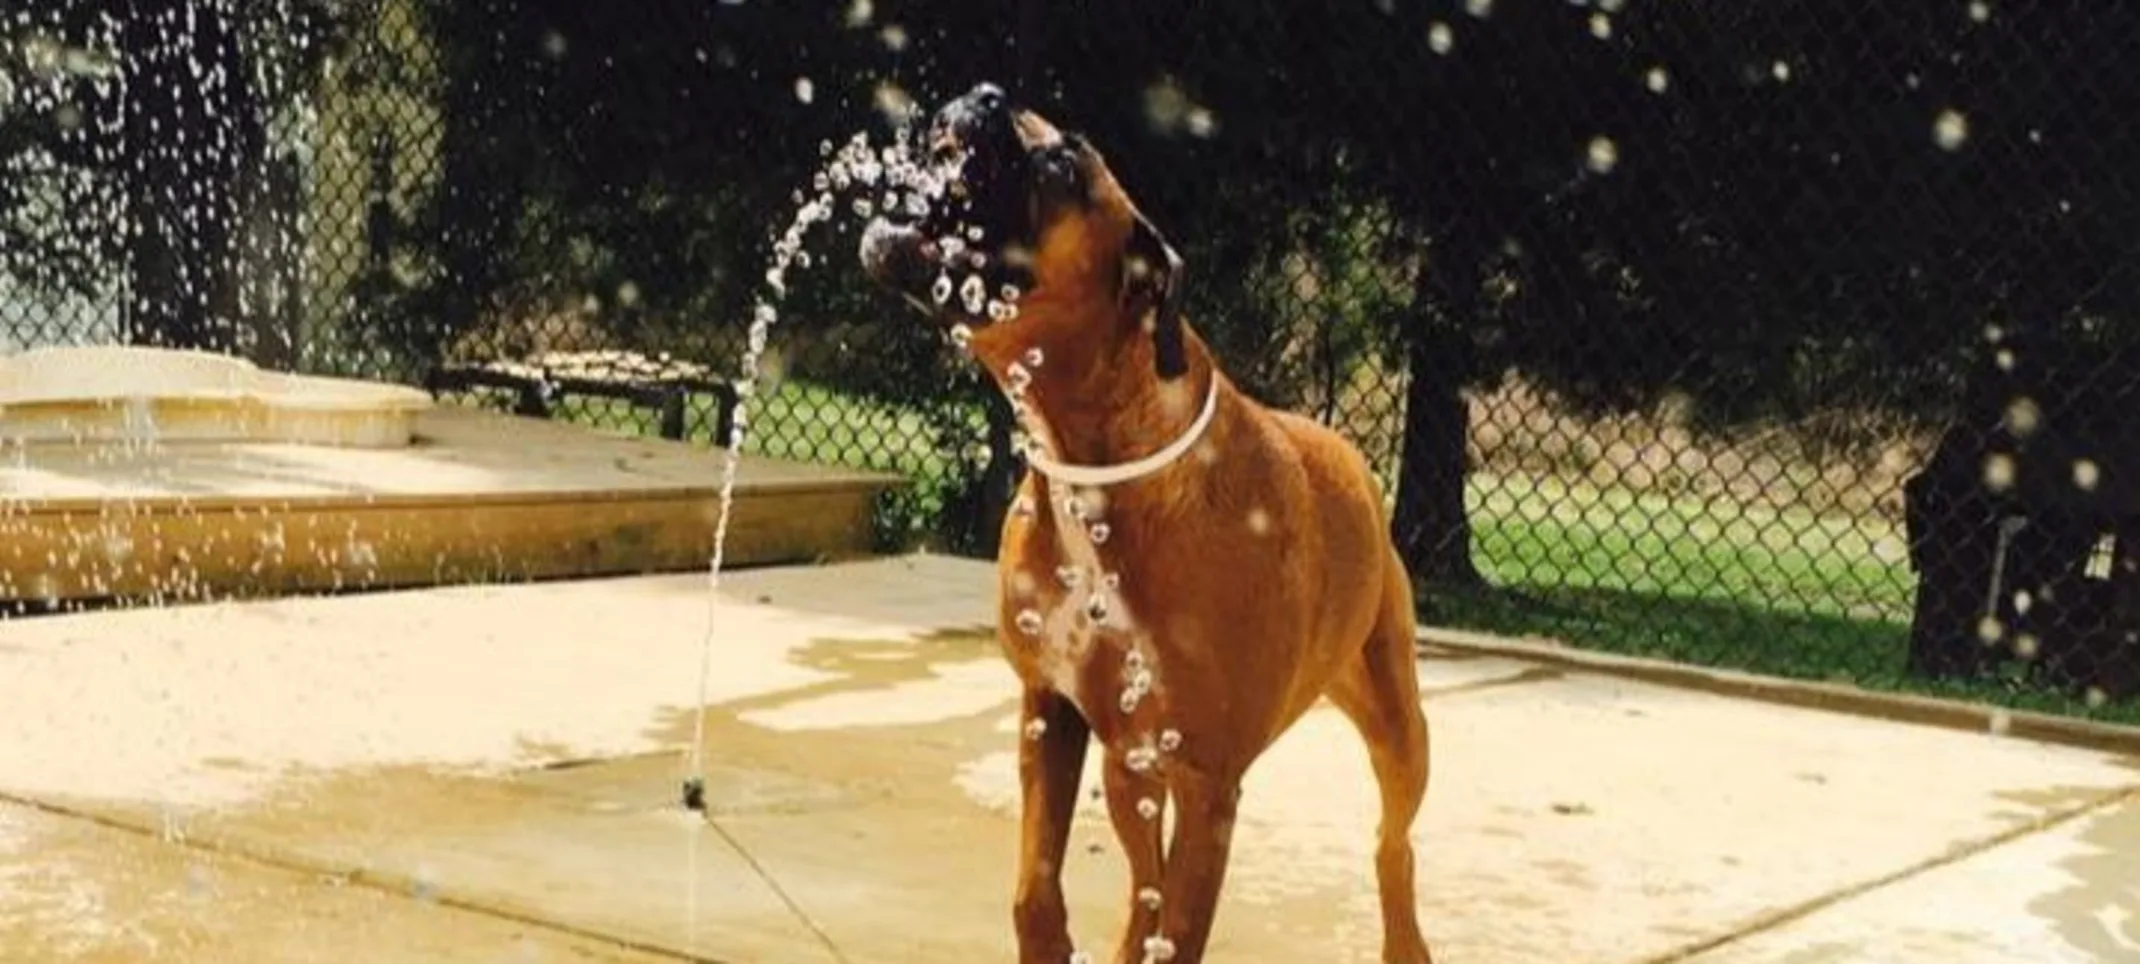 Happy dog playing outside with a water hose splashing around.